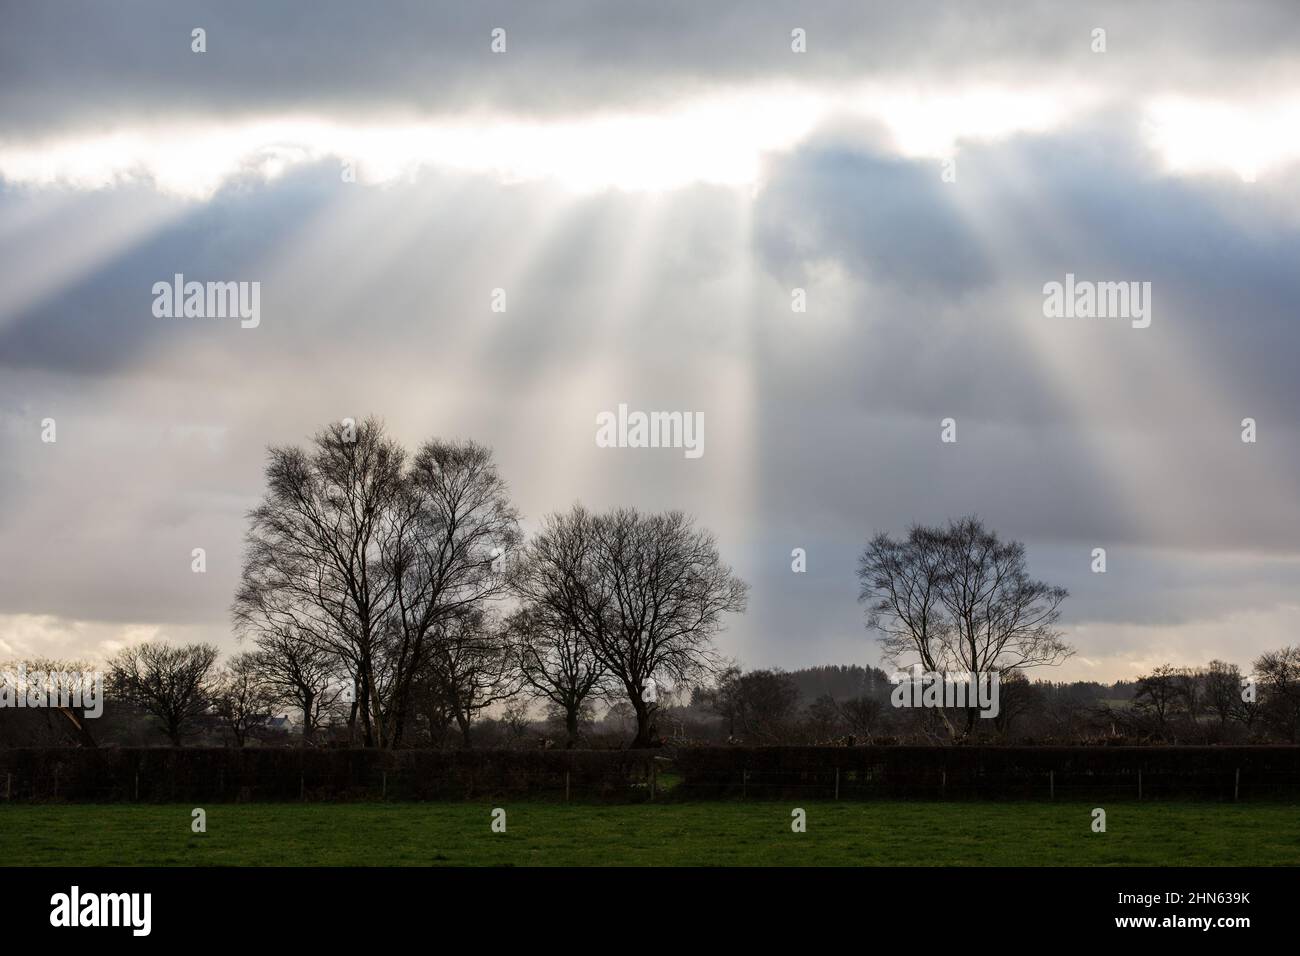 Pontrhydfendigaid, Ceredigion, Wales, UK. 14th February 2022  UK Weather: A cold and wet cloudy day, with crepuscular rays streaming through the clouds at Pontrhydfendigaid in mid Wales. © Ian Jones/Alamy Live News Stock Photo